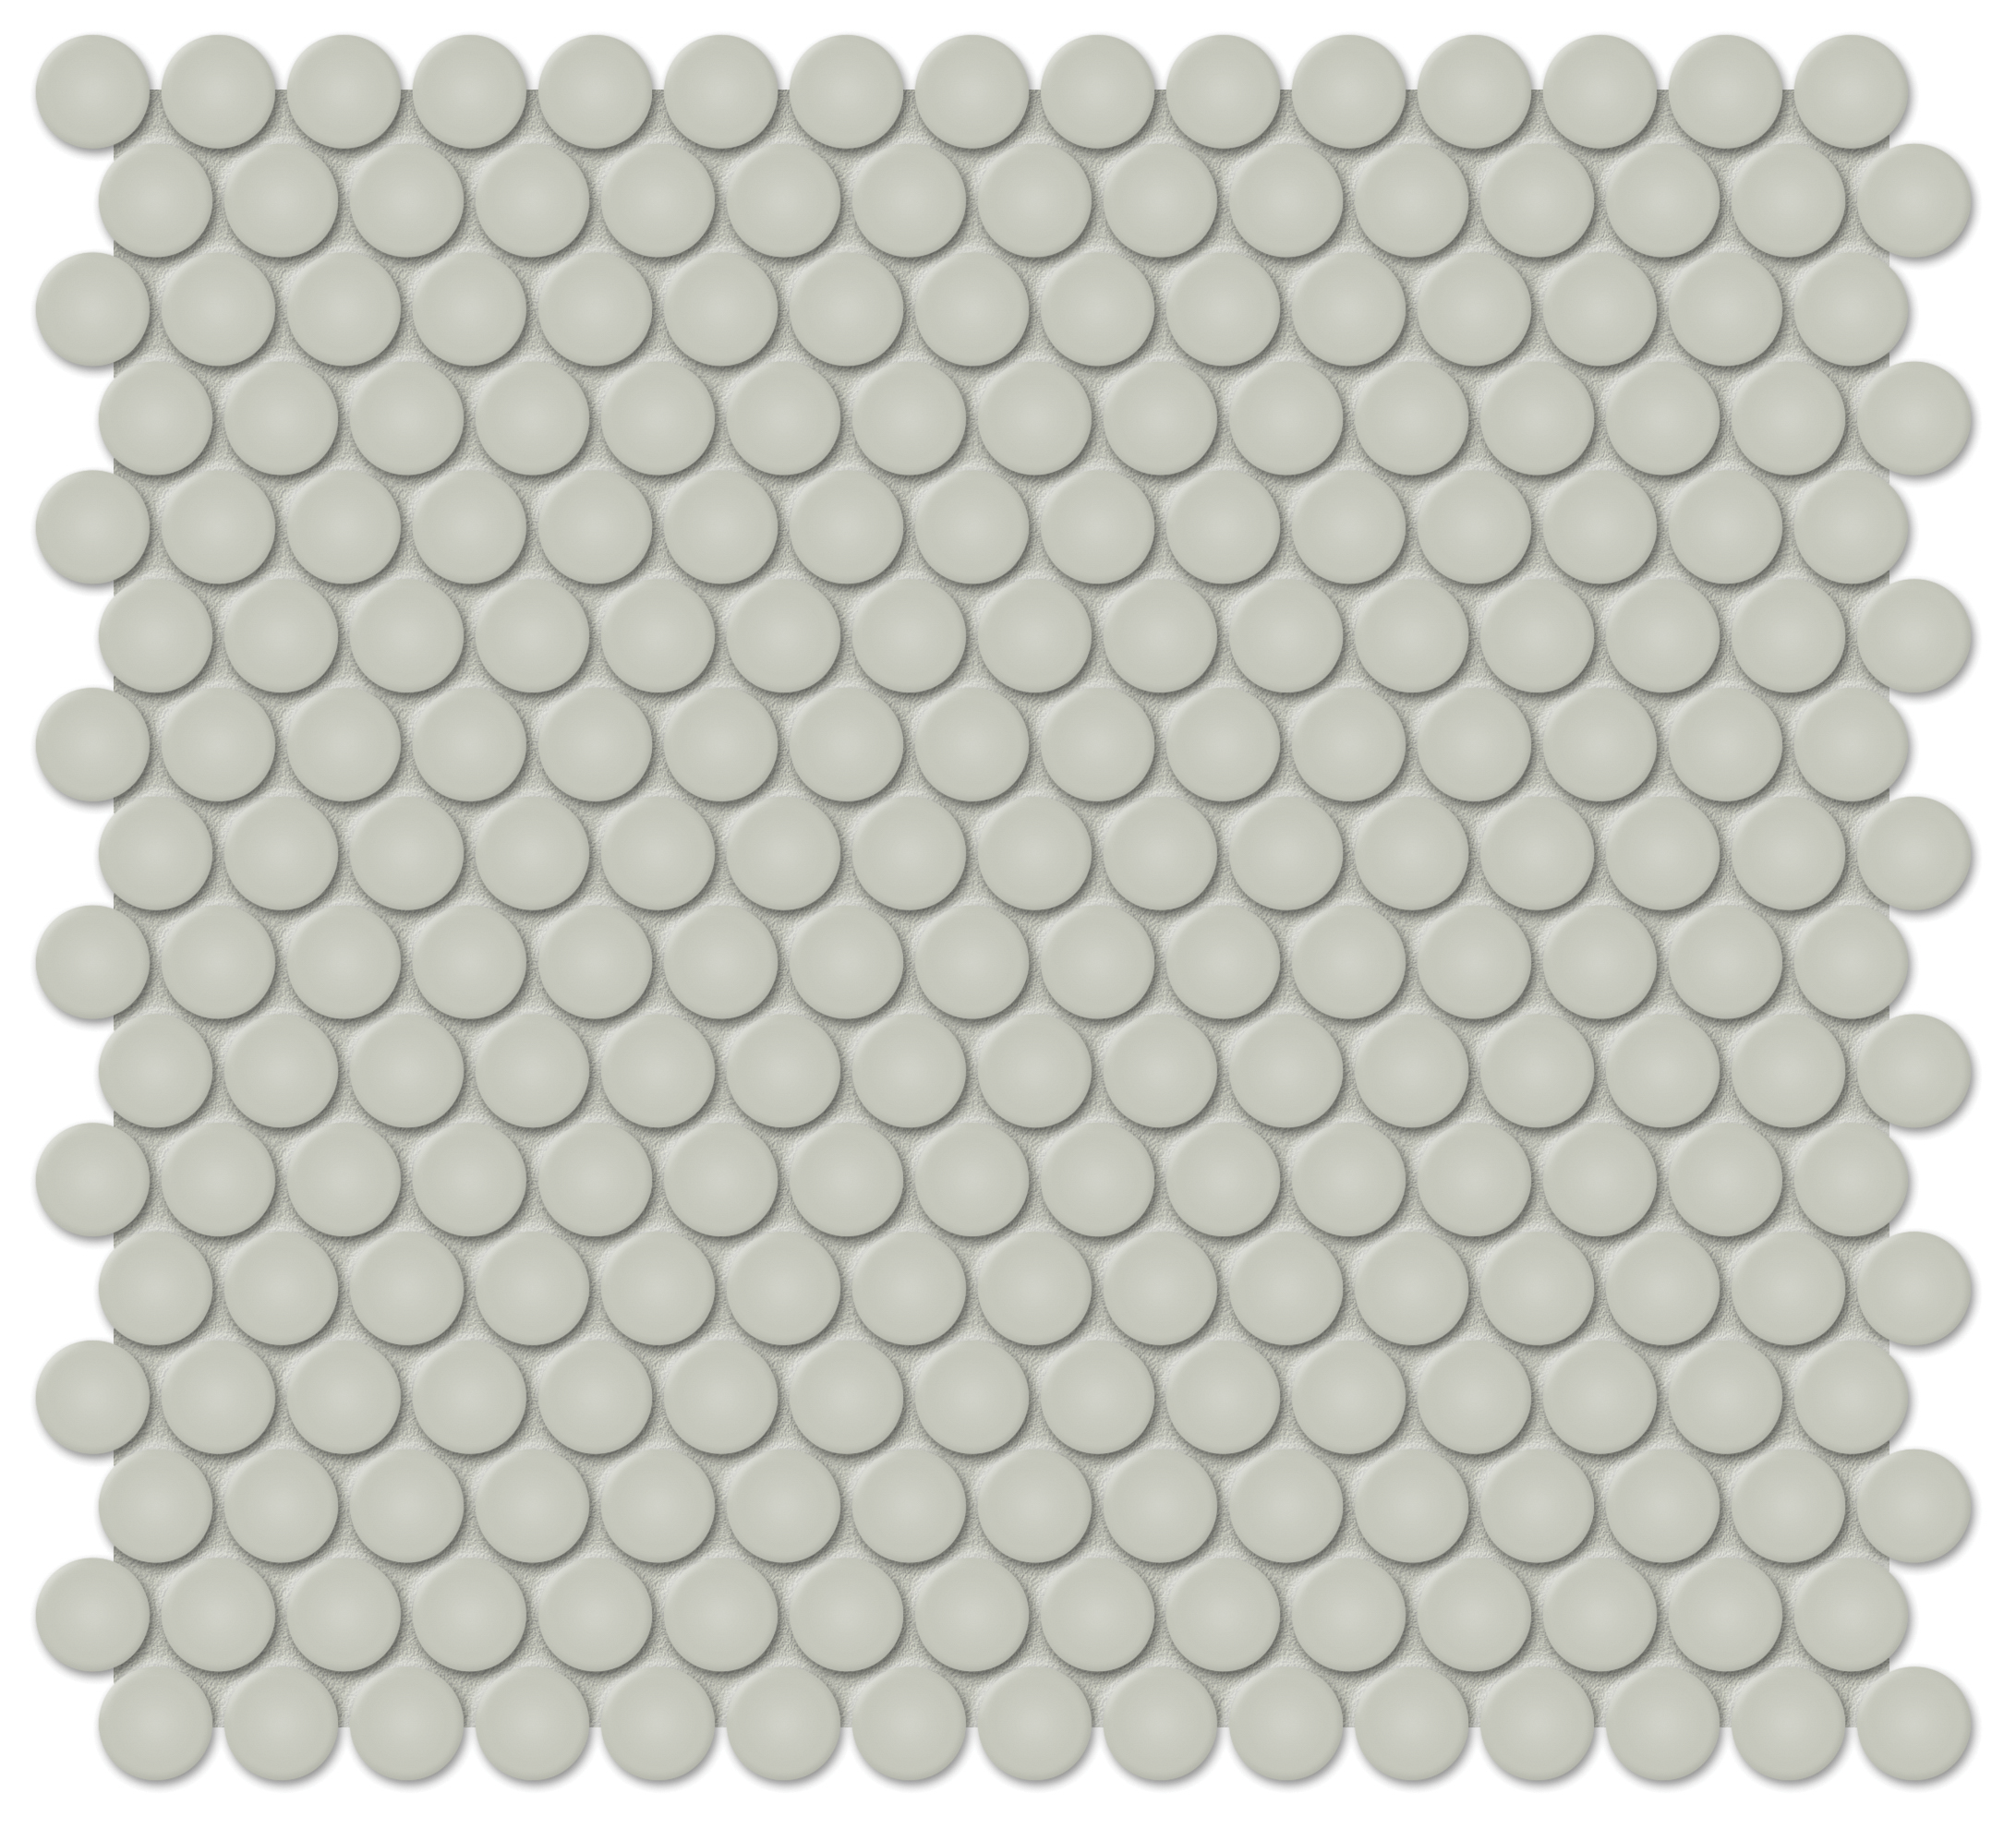 soft sage penny round 3_4-inch pattern glazed porcelain mosaic from soho anatolia collection distributed by surface group international glossy finish pressed edge mesh shape